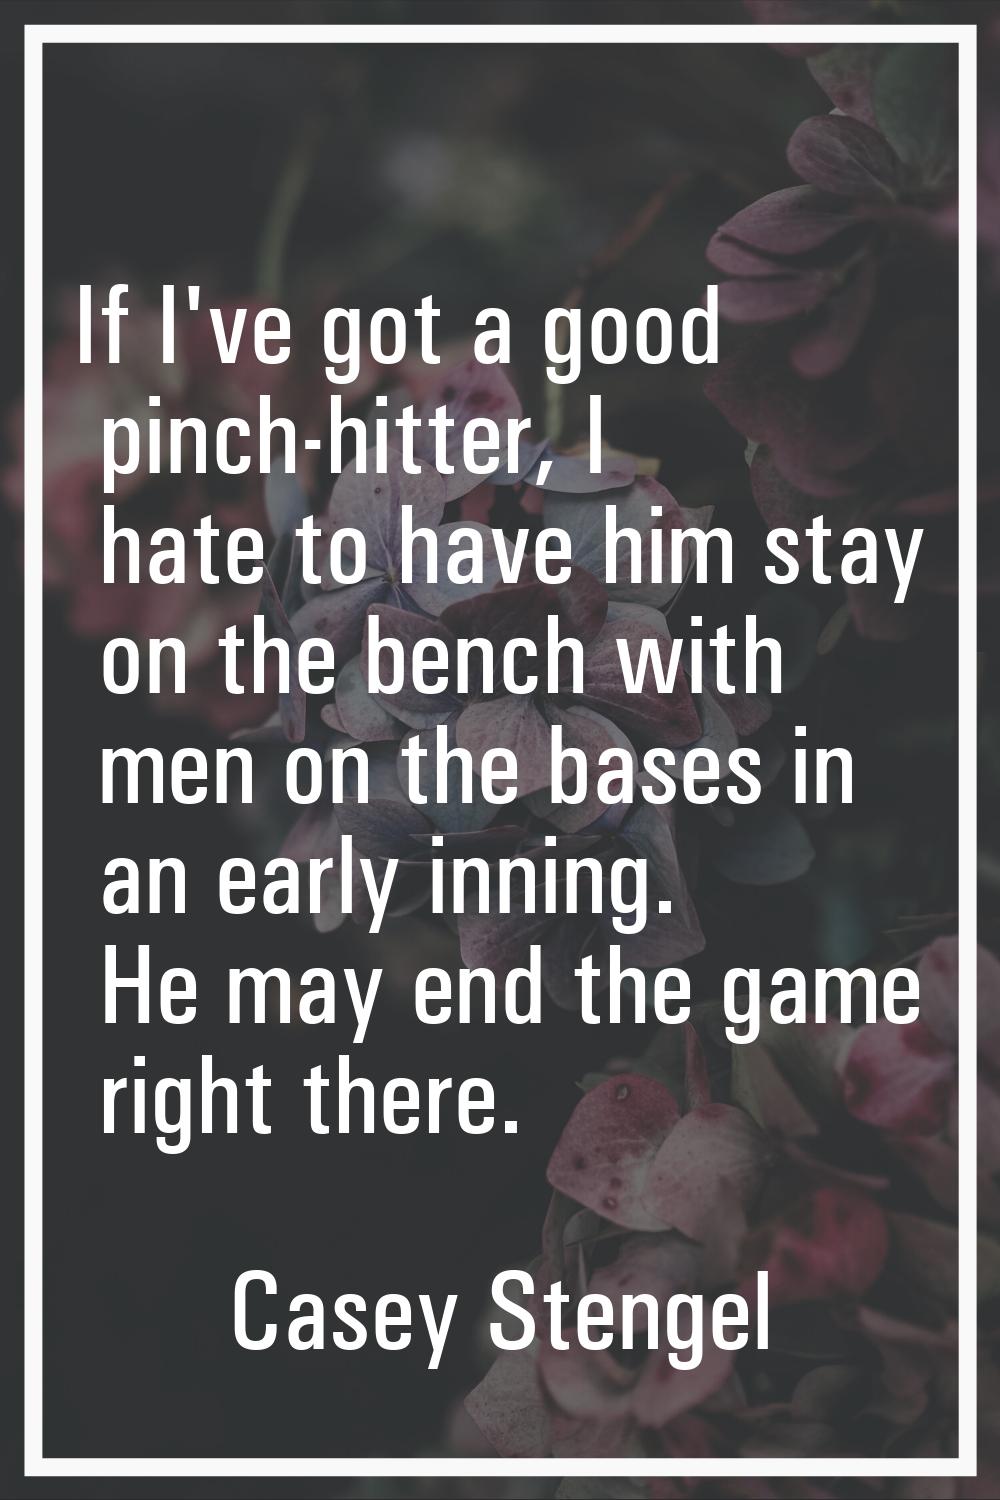 If I've got a good pinch-hitter, I hate to have him stay on the bench with men on the bases in an e